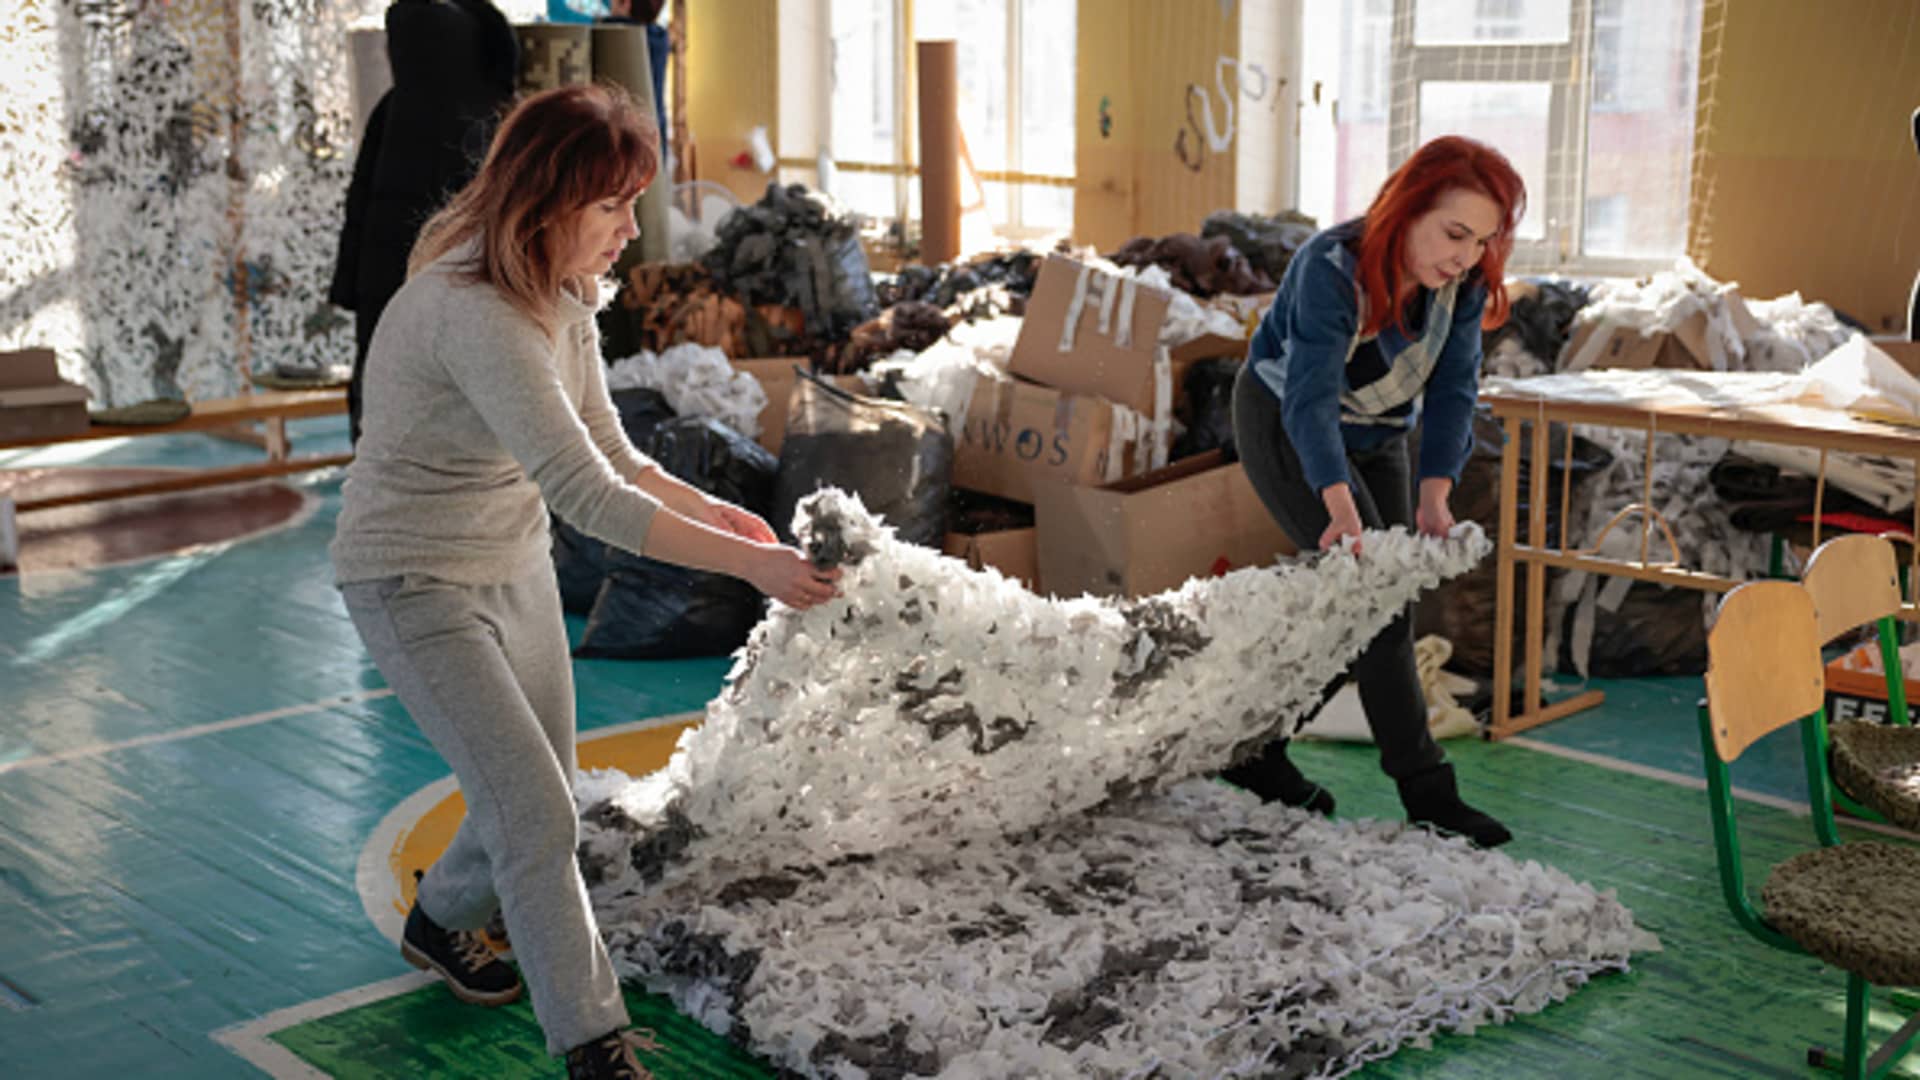 Women make artic warfare camouflage in a school gymnasium on December 01, 2022 in Bucha, Ukraine. Ukrainian officials expect a new wave of Russian bombing this week, with previous rounds targeting critical infrastructure and causing massive water and power cuts, including in the capital Kyiv. 